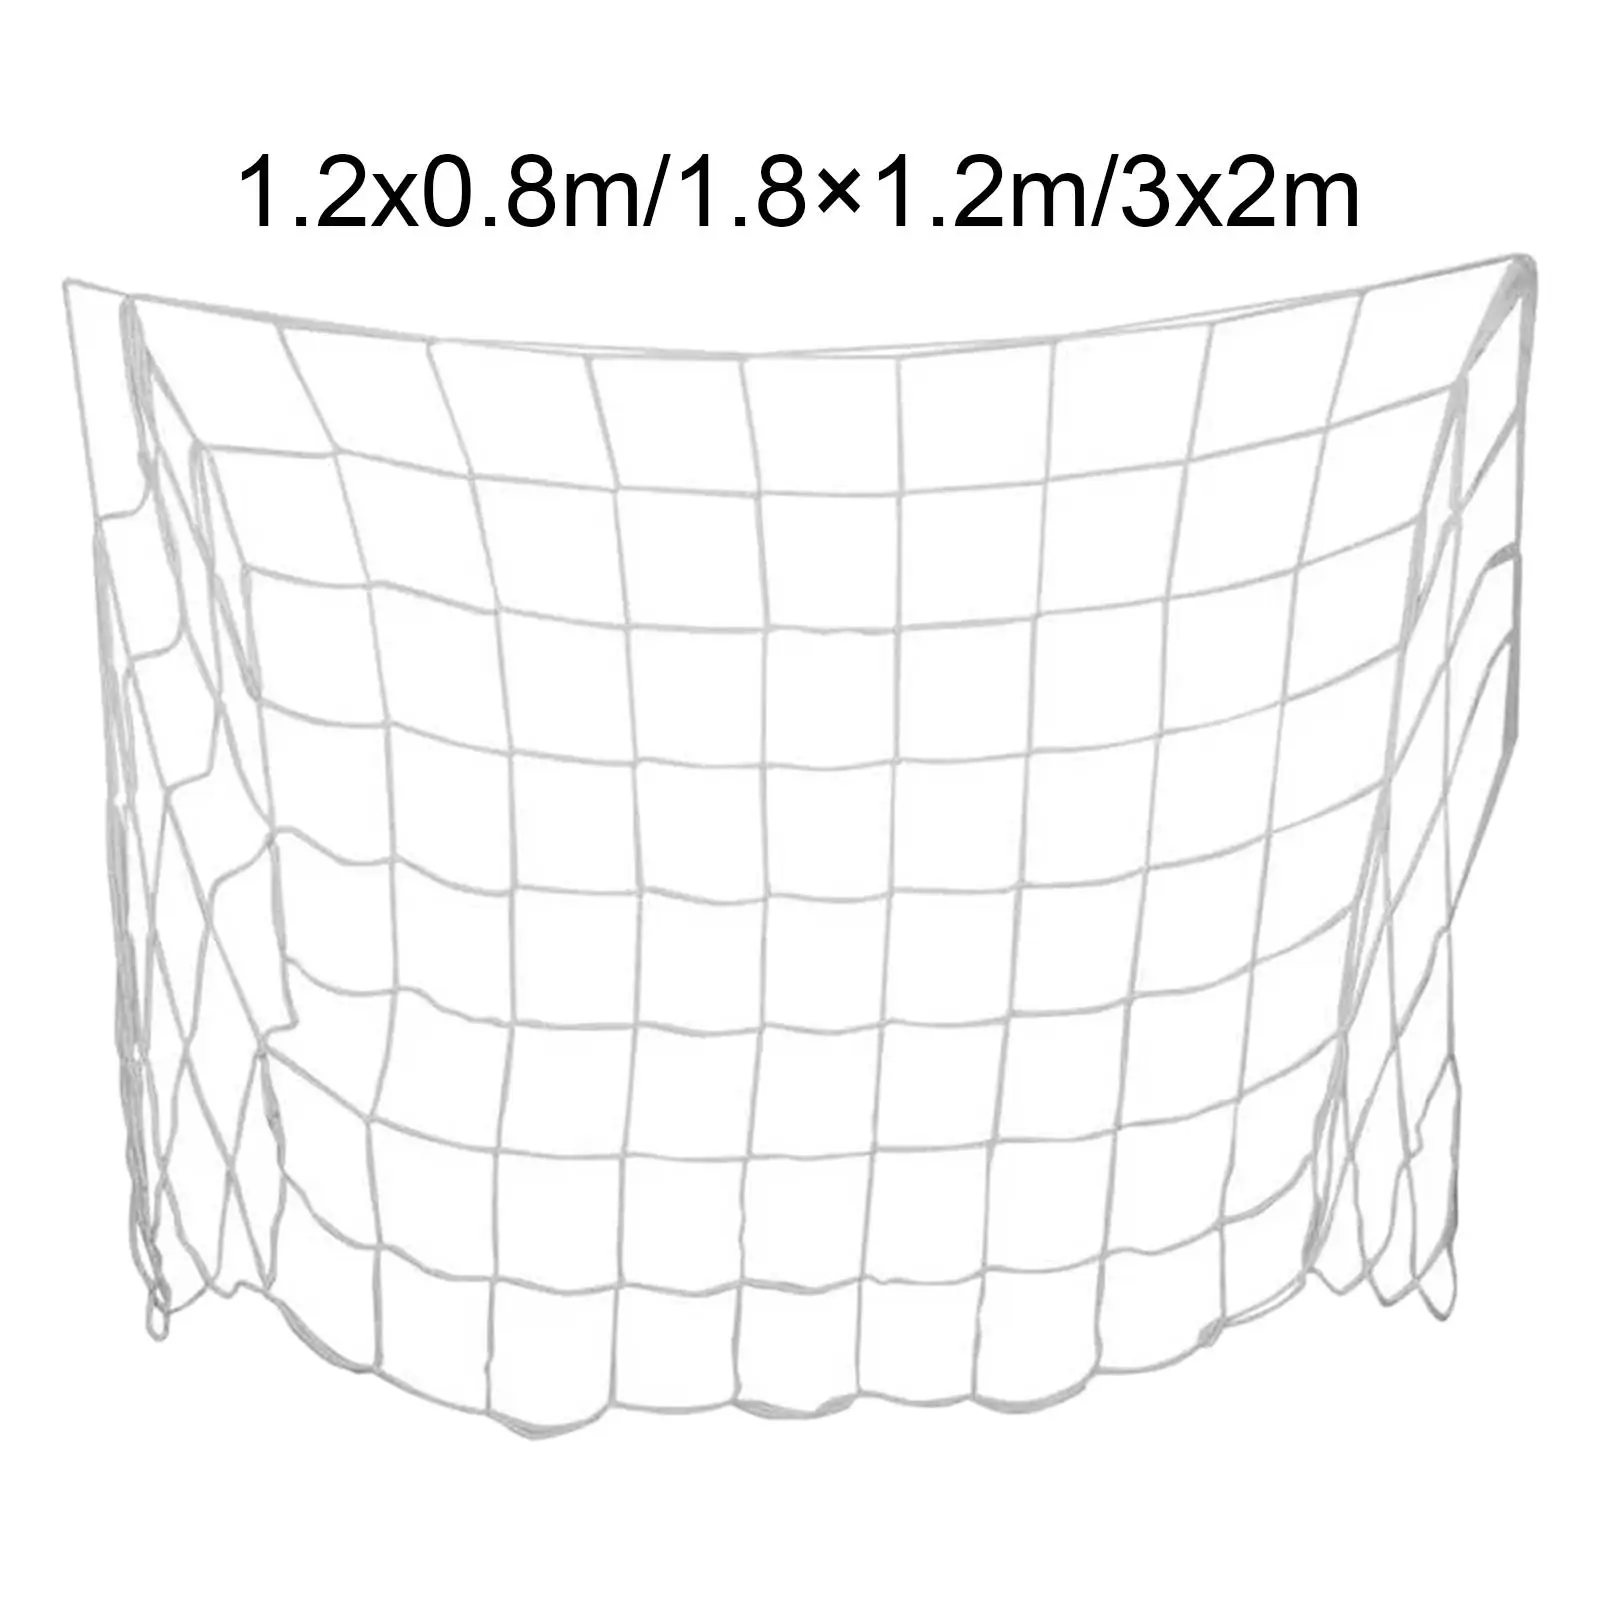 Portable Soccer Goal Net Replacement Accessories Polyethylene Netting White Football Net for Training Competition Match